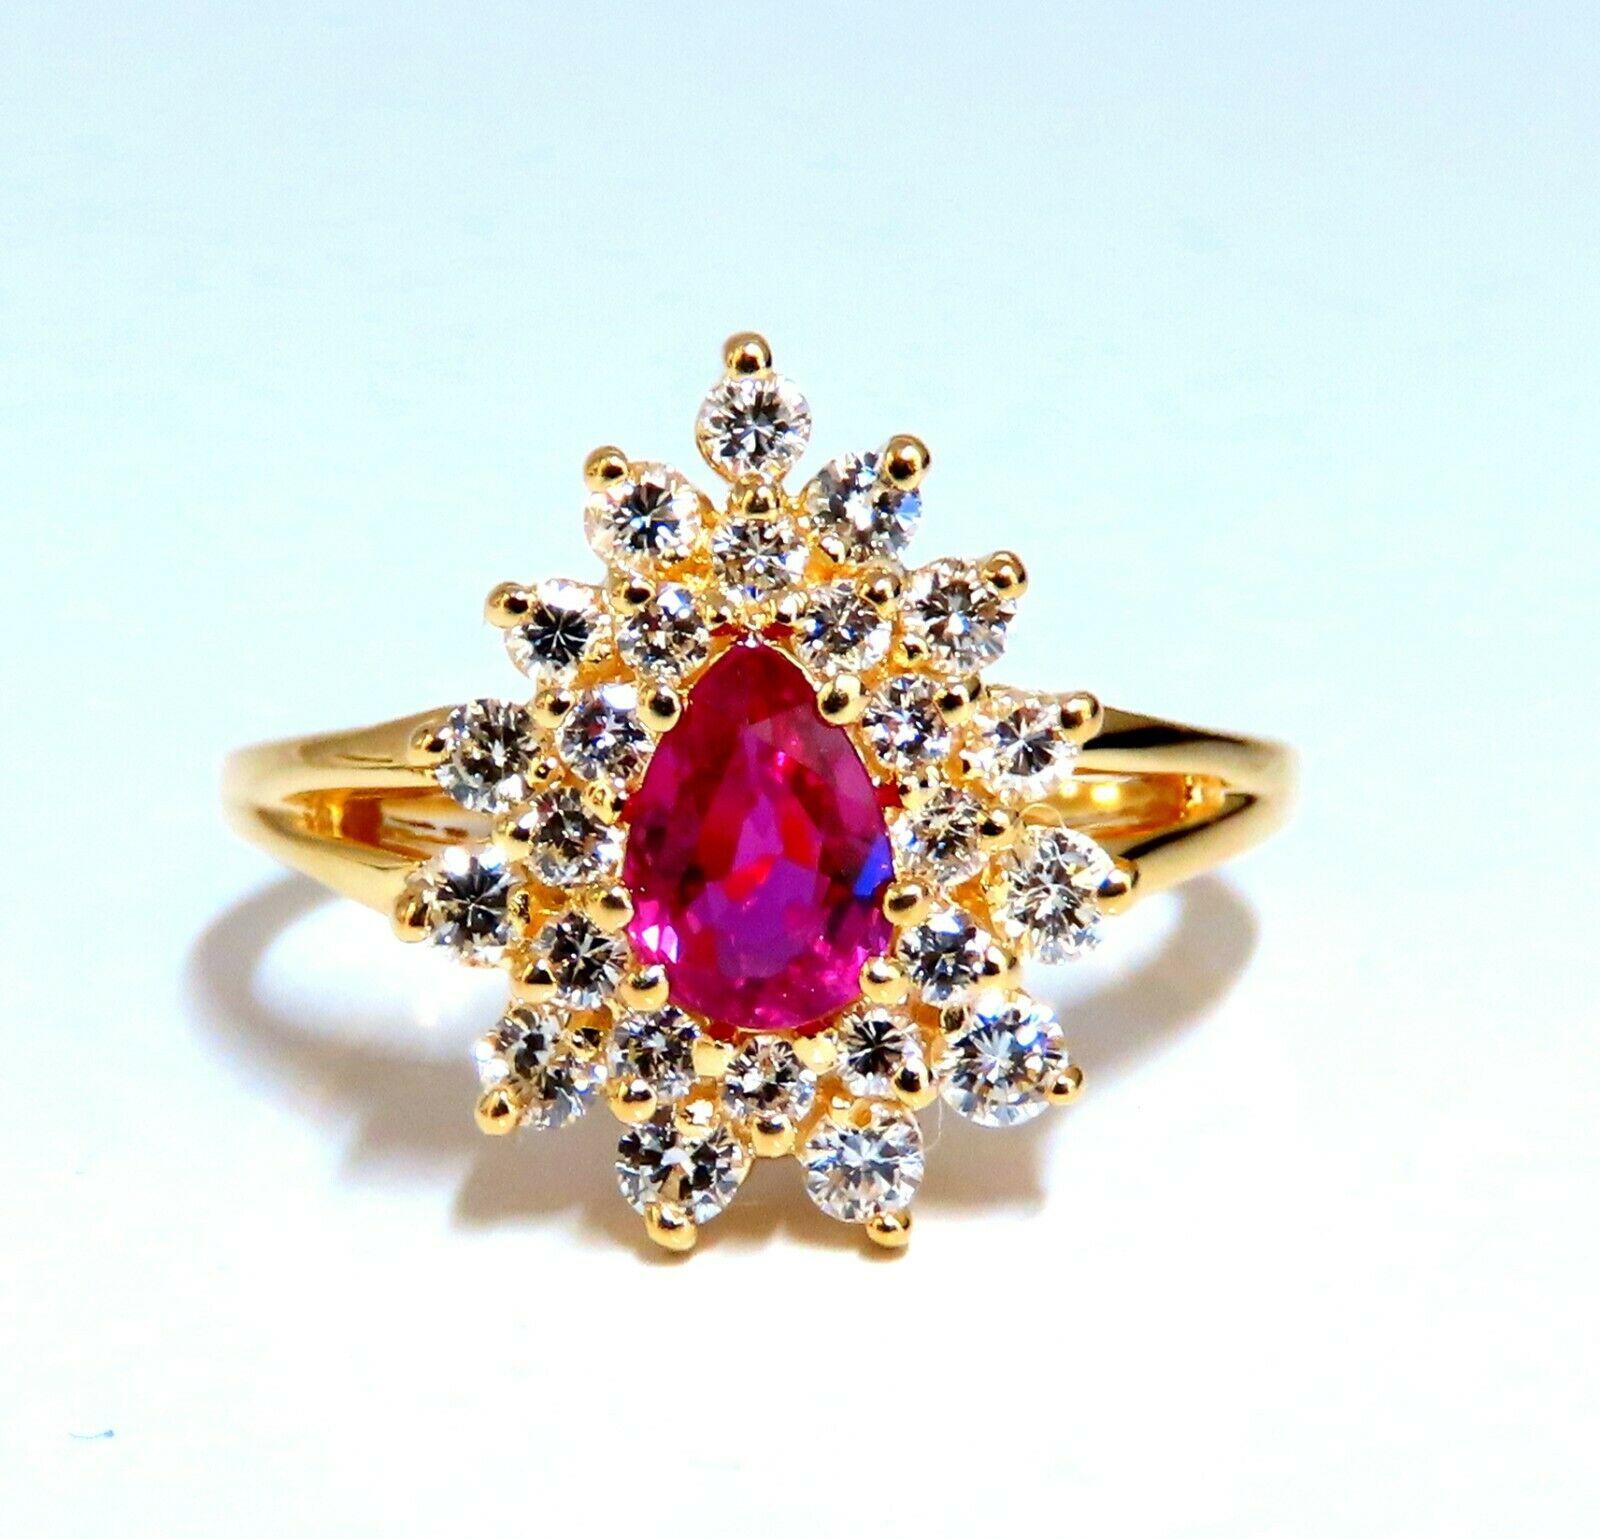  .60ct. Natural Ruby Cocktail Halo ring 
Pear cut 
Fully faceted Clean clarity
 5.3 x 3.4mm
Vivid Red / Vs Clear Clarity
.42ct. Diamonds:  Rounds, full cuts 
 G-color, Vs-2 clarity. 
 14kt. yellow gold. 
 3.2 grams. 
Deck of ring: 14mm x 11mm
